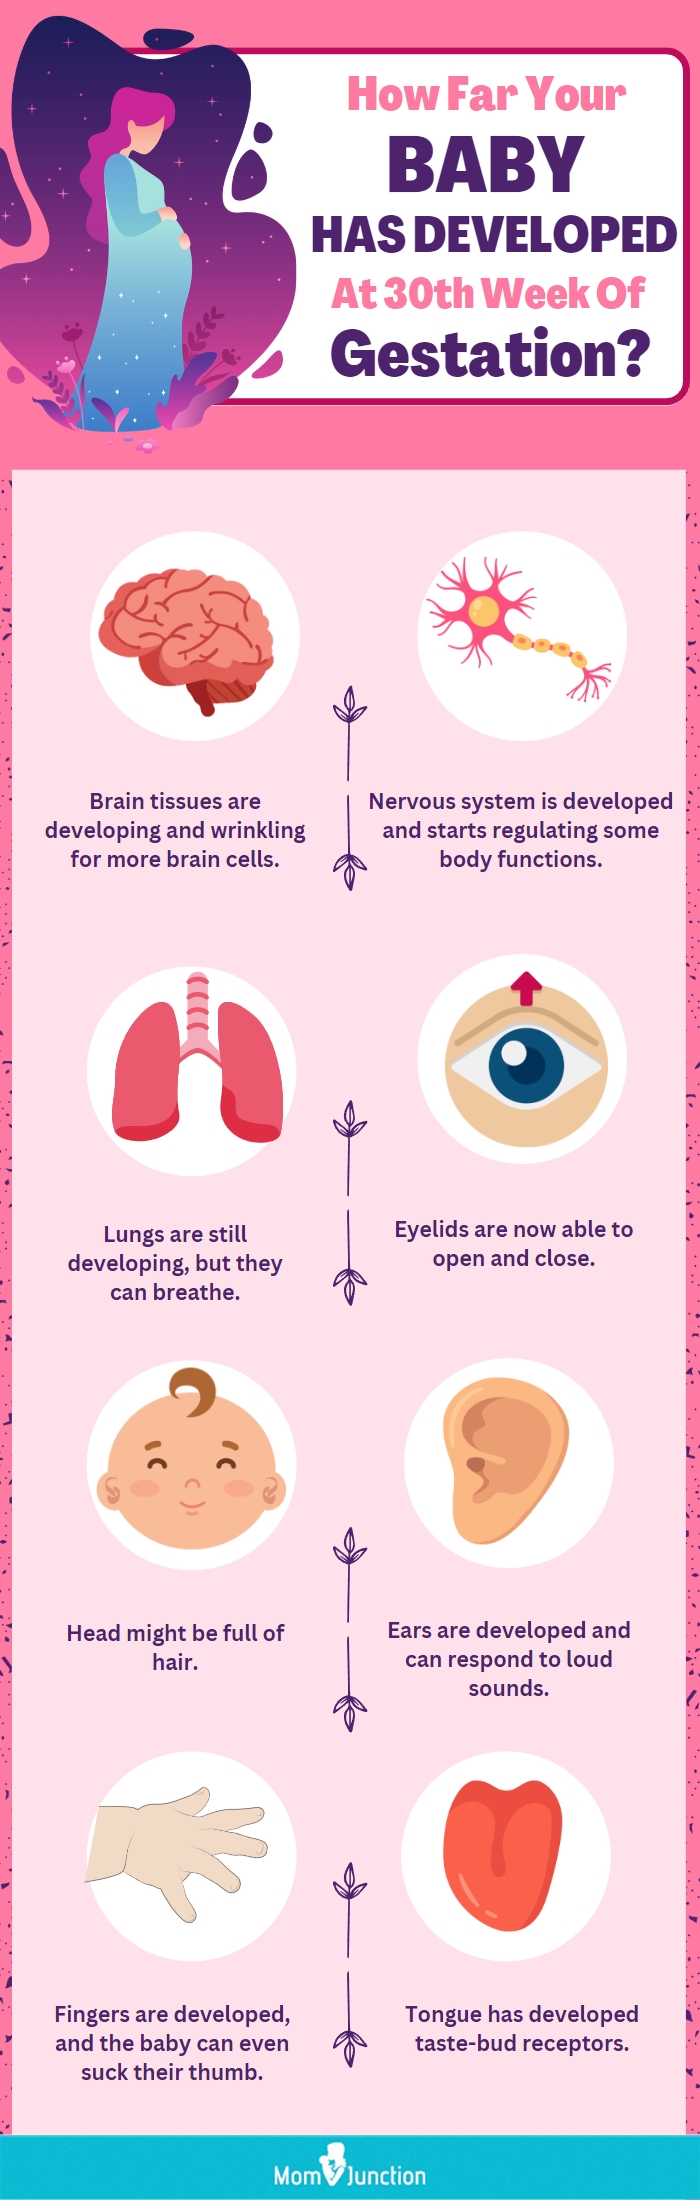 how far your baby has developed at 30th week of gestation (infographic)